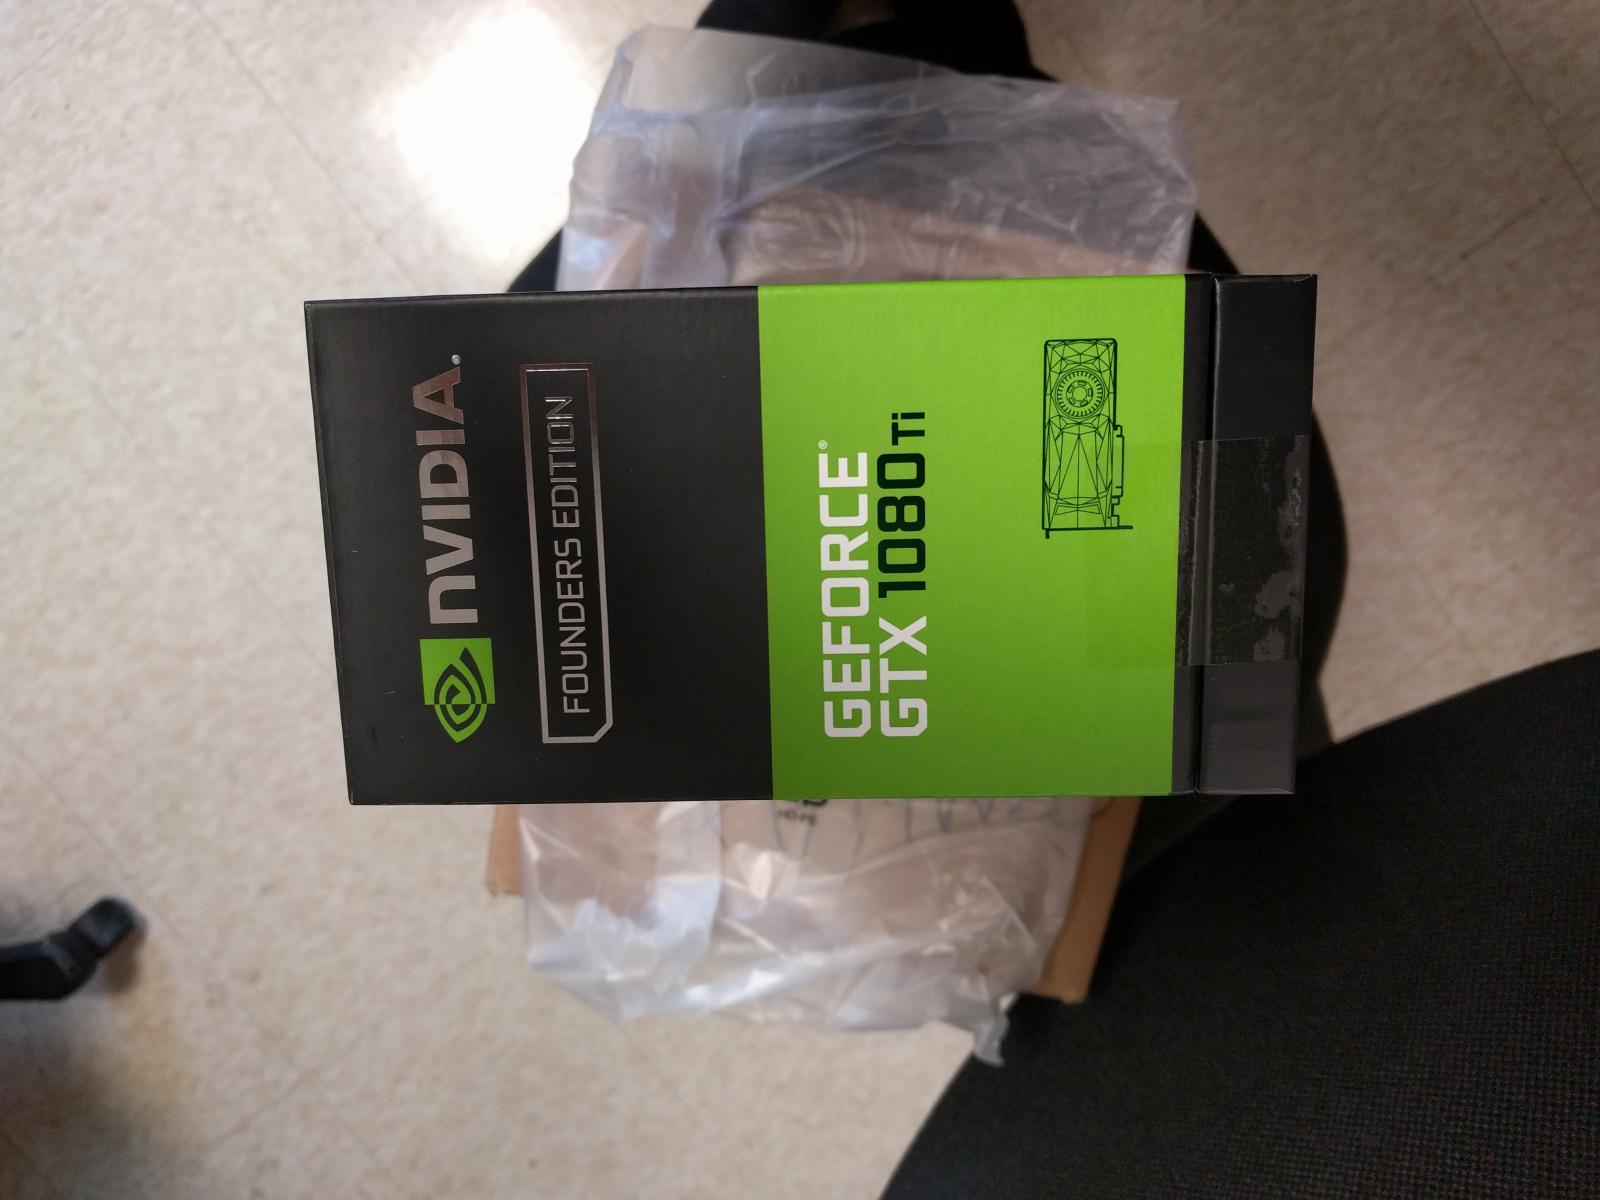 For sale Nvidia GTX 1080 Ti - FE Founder's Edition NEVER OPENED, BRAND NEW, Priority Ship